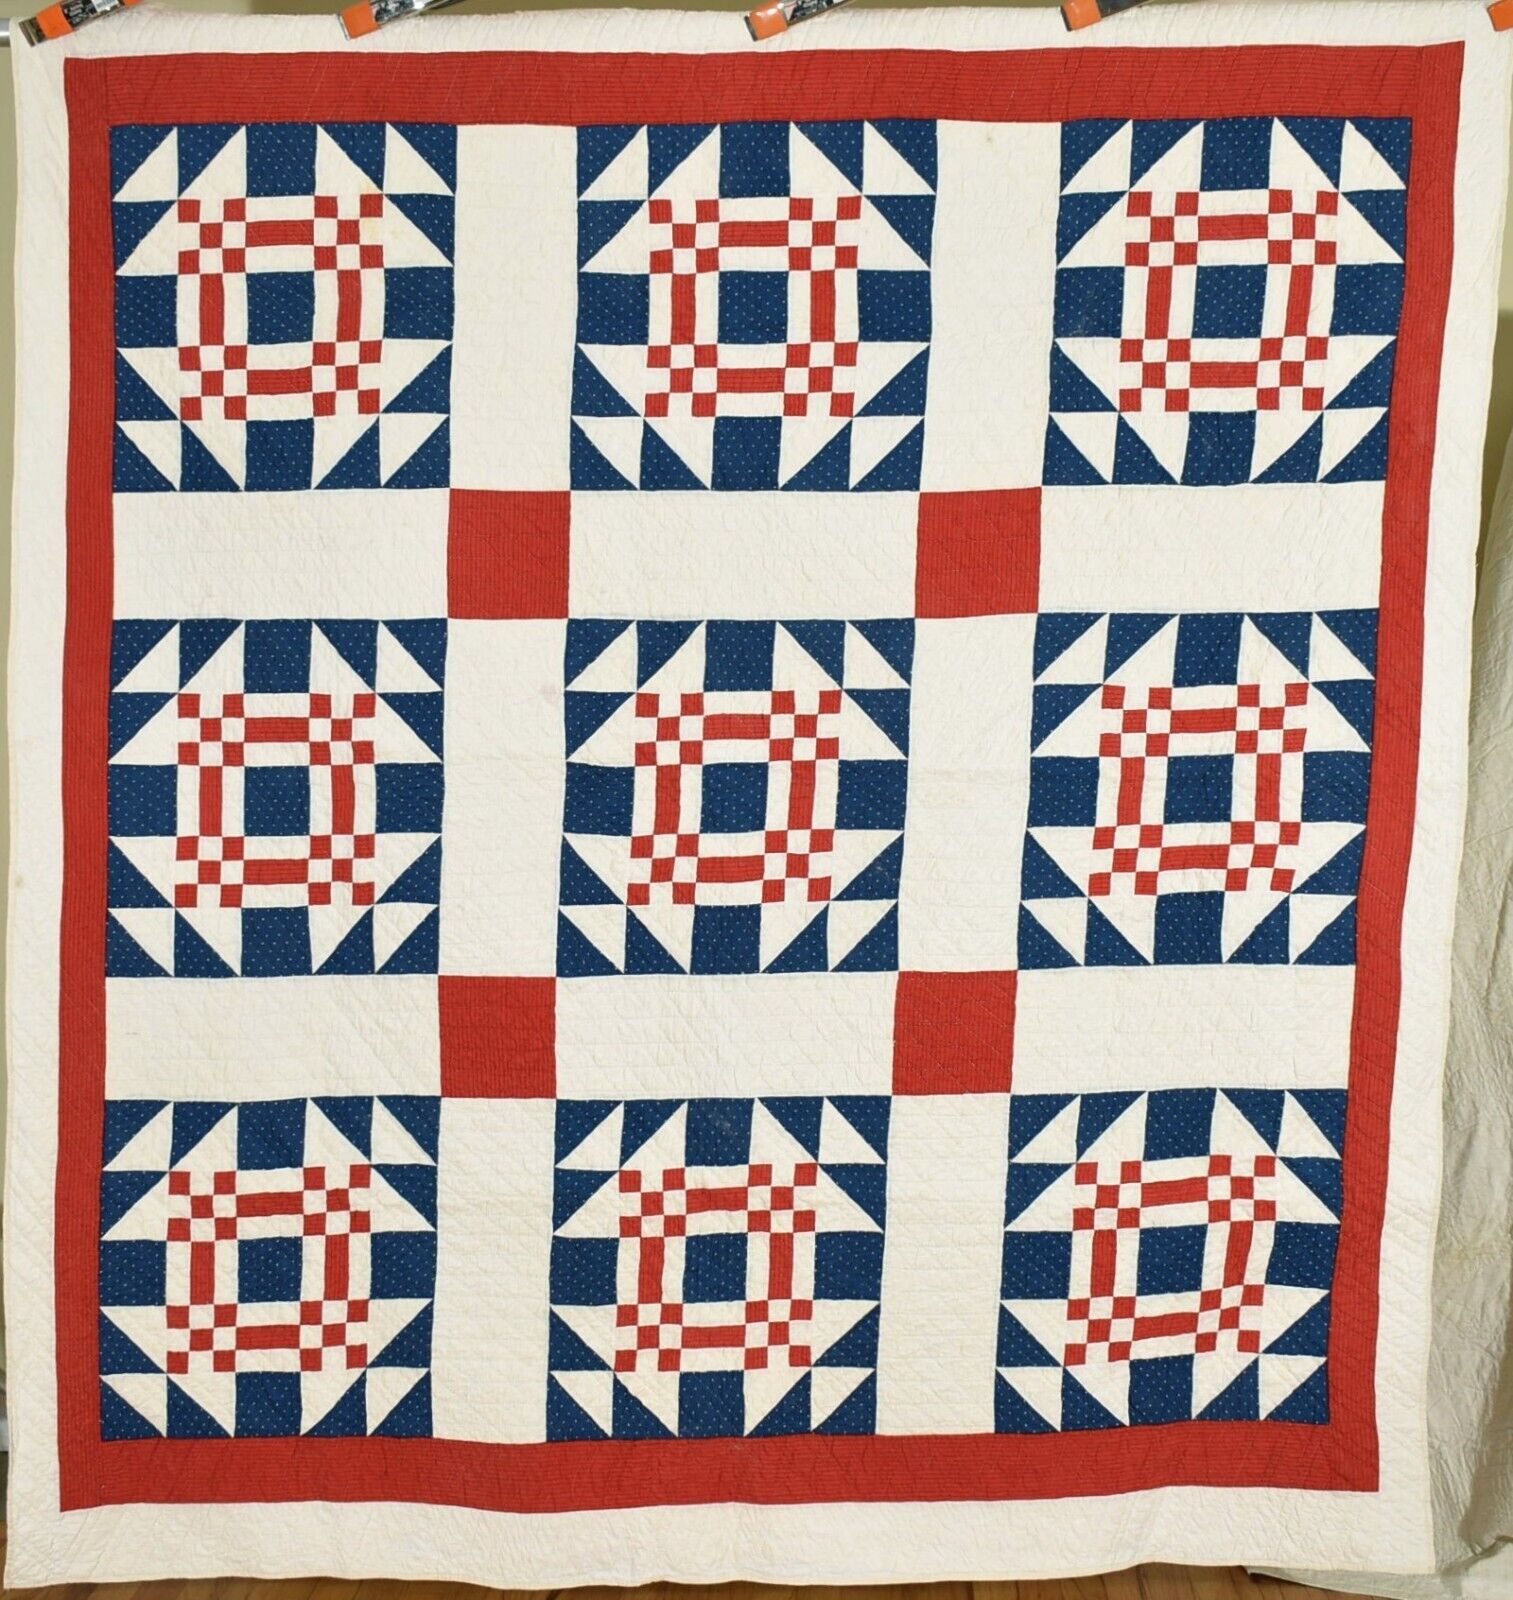 OUTSTANDING Vintage 1880's Red, White & Blue Steeplechase Antique Quilt